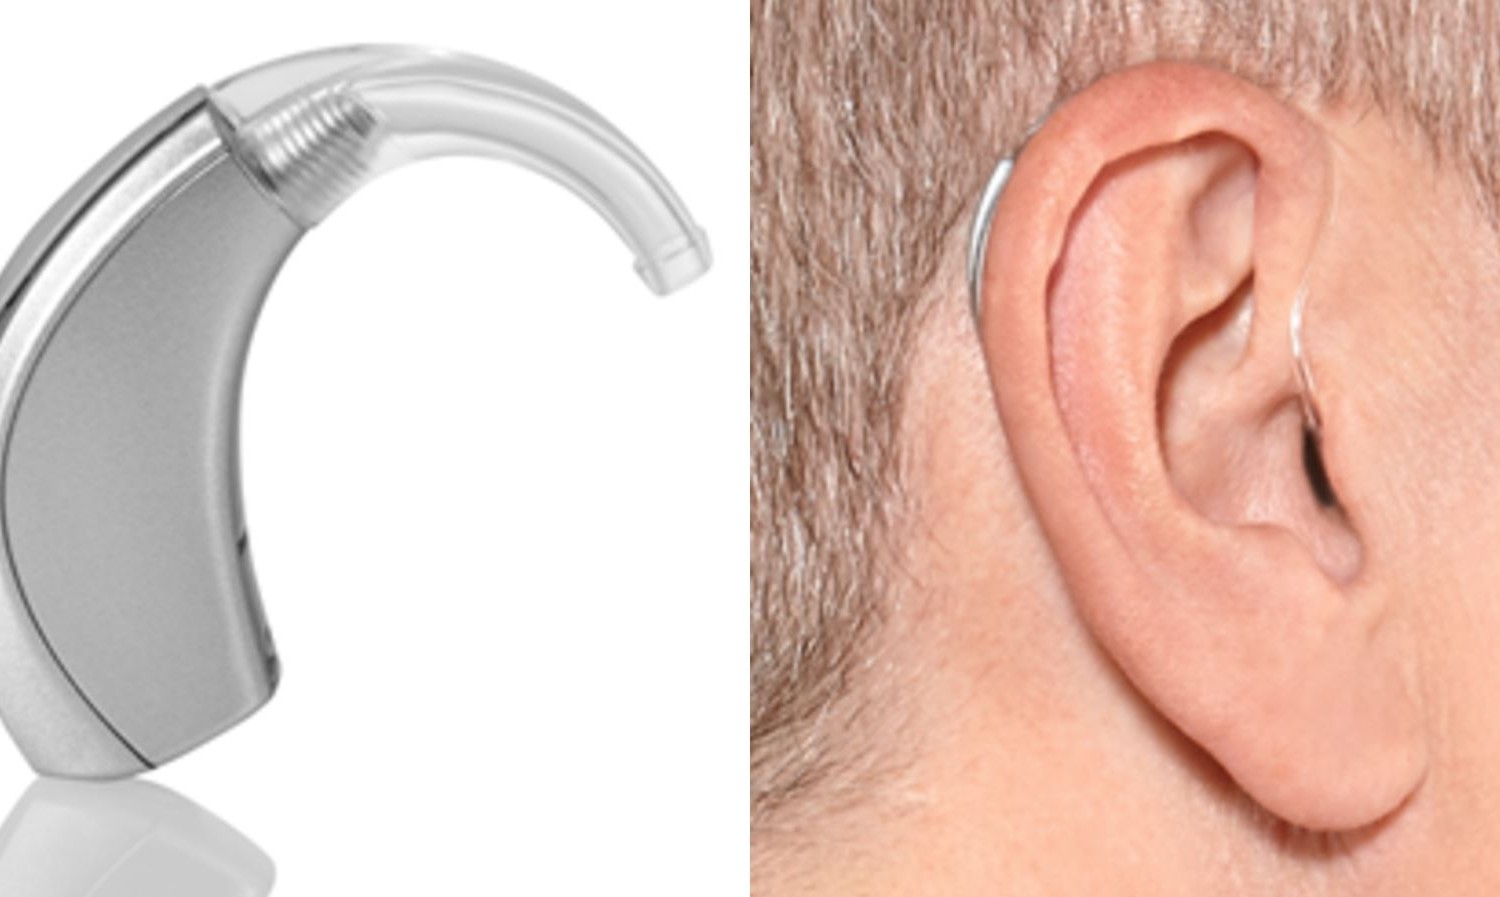 hearing-aid-types-what-available-on-the-uk-market-your-hearing